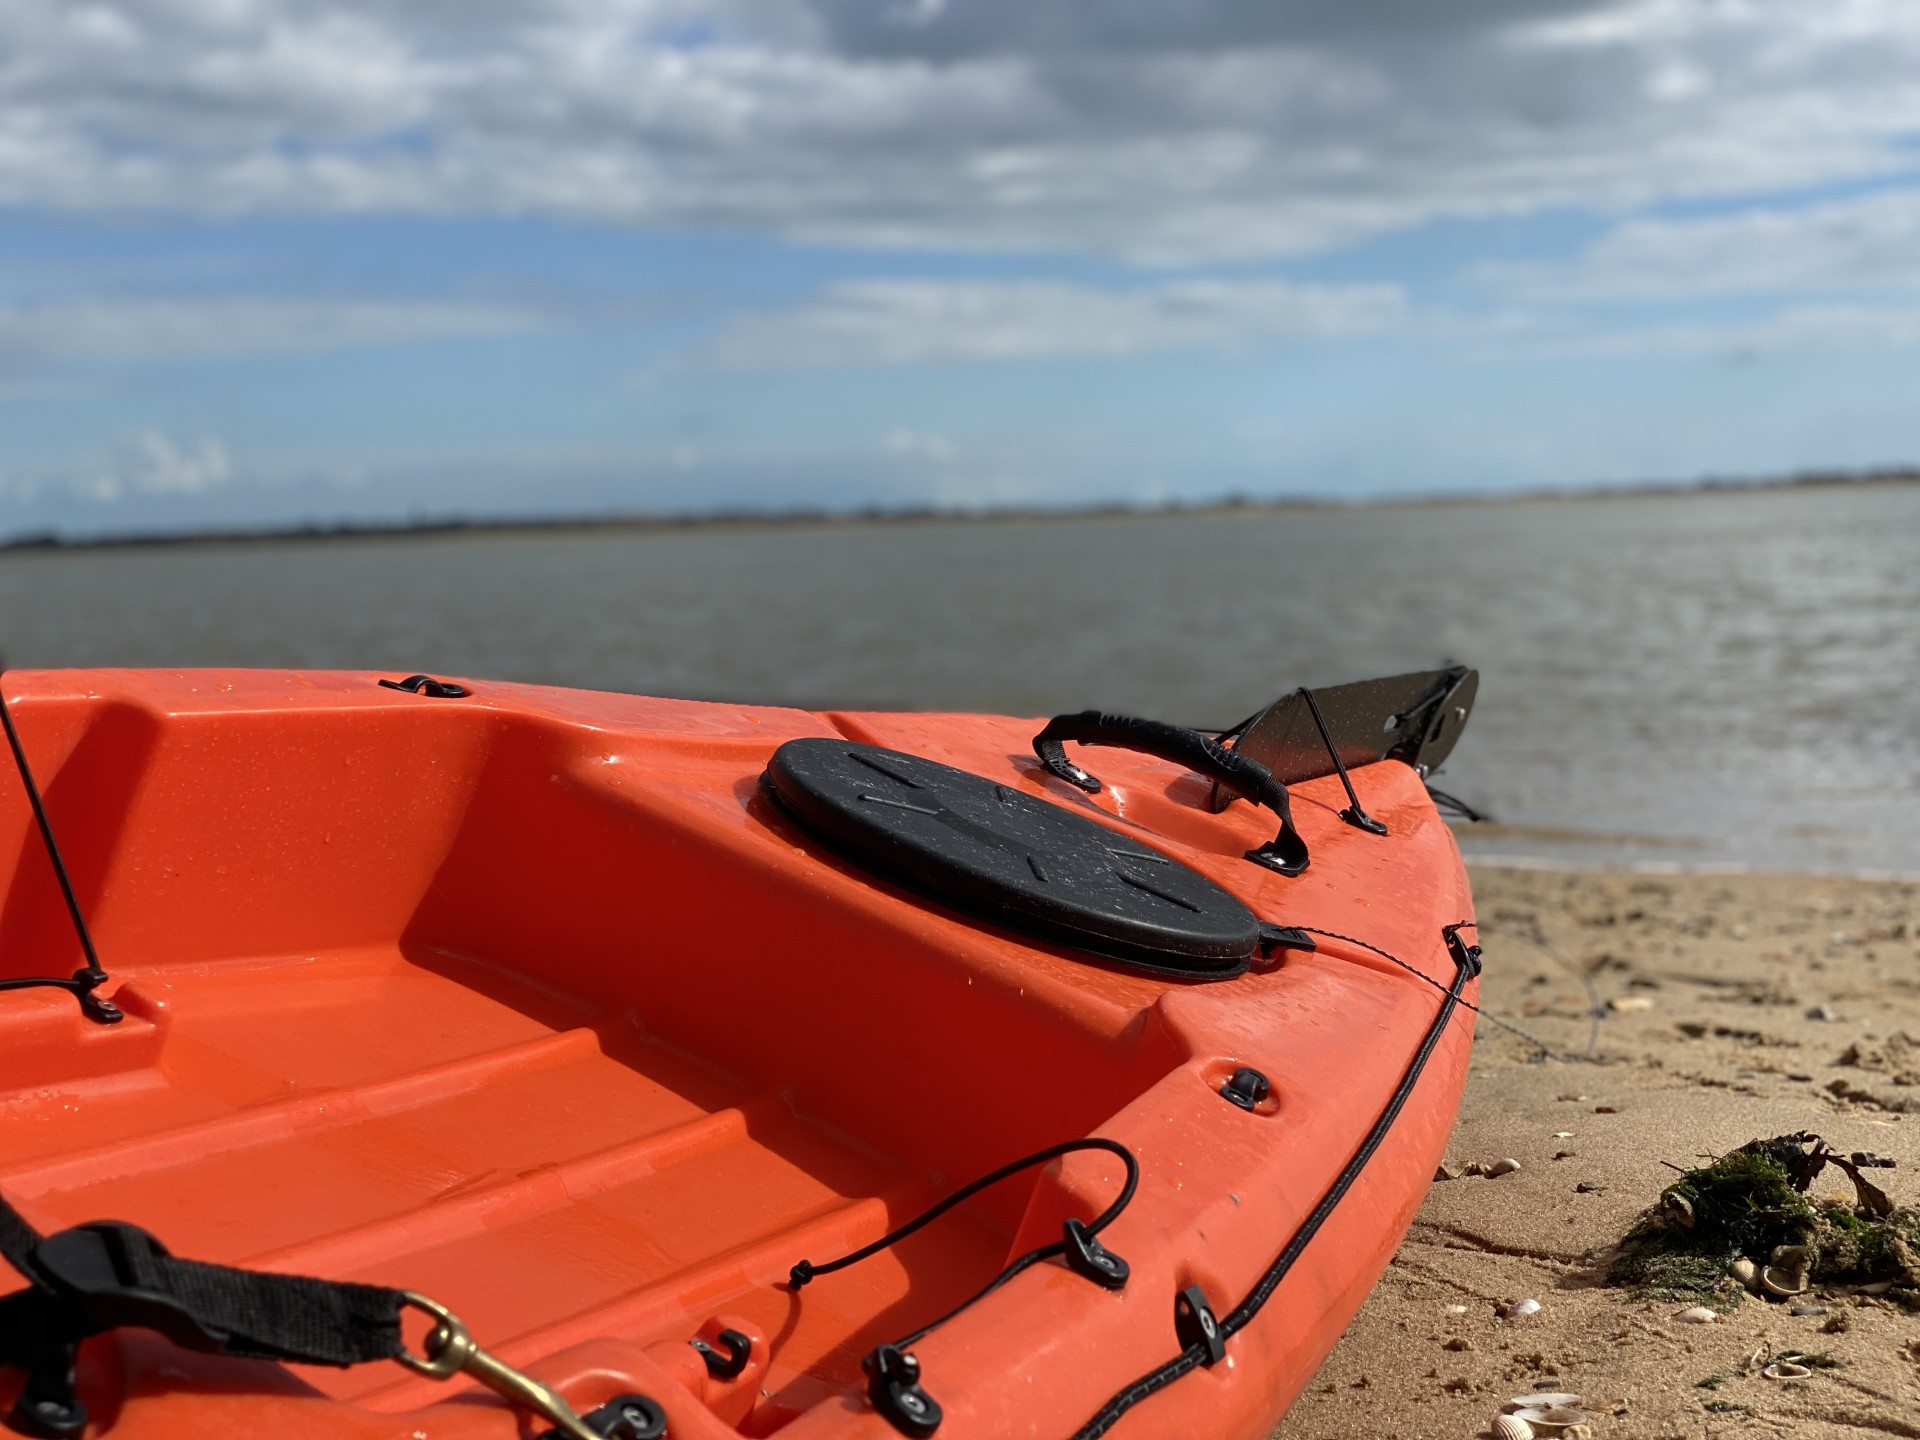 Stable sit-on-top kayak on a sandy beach.